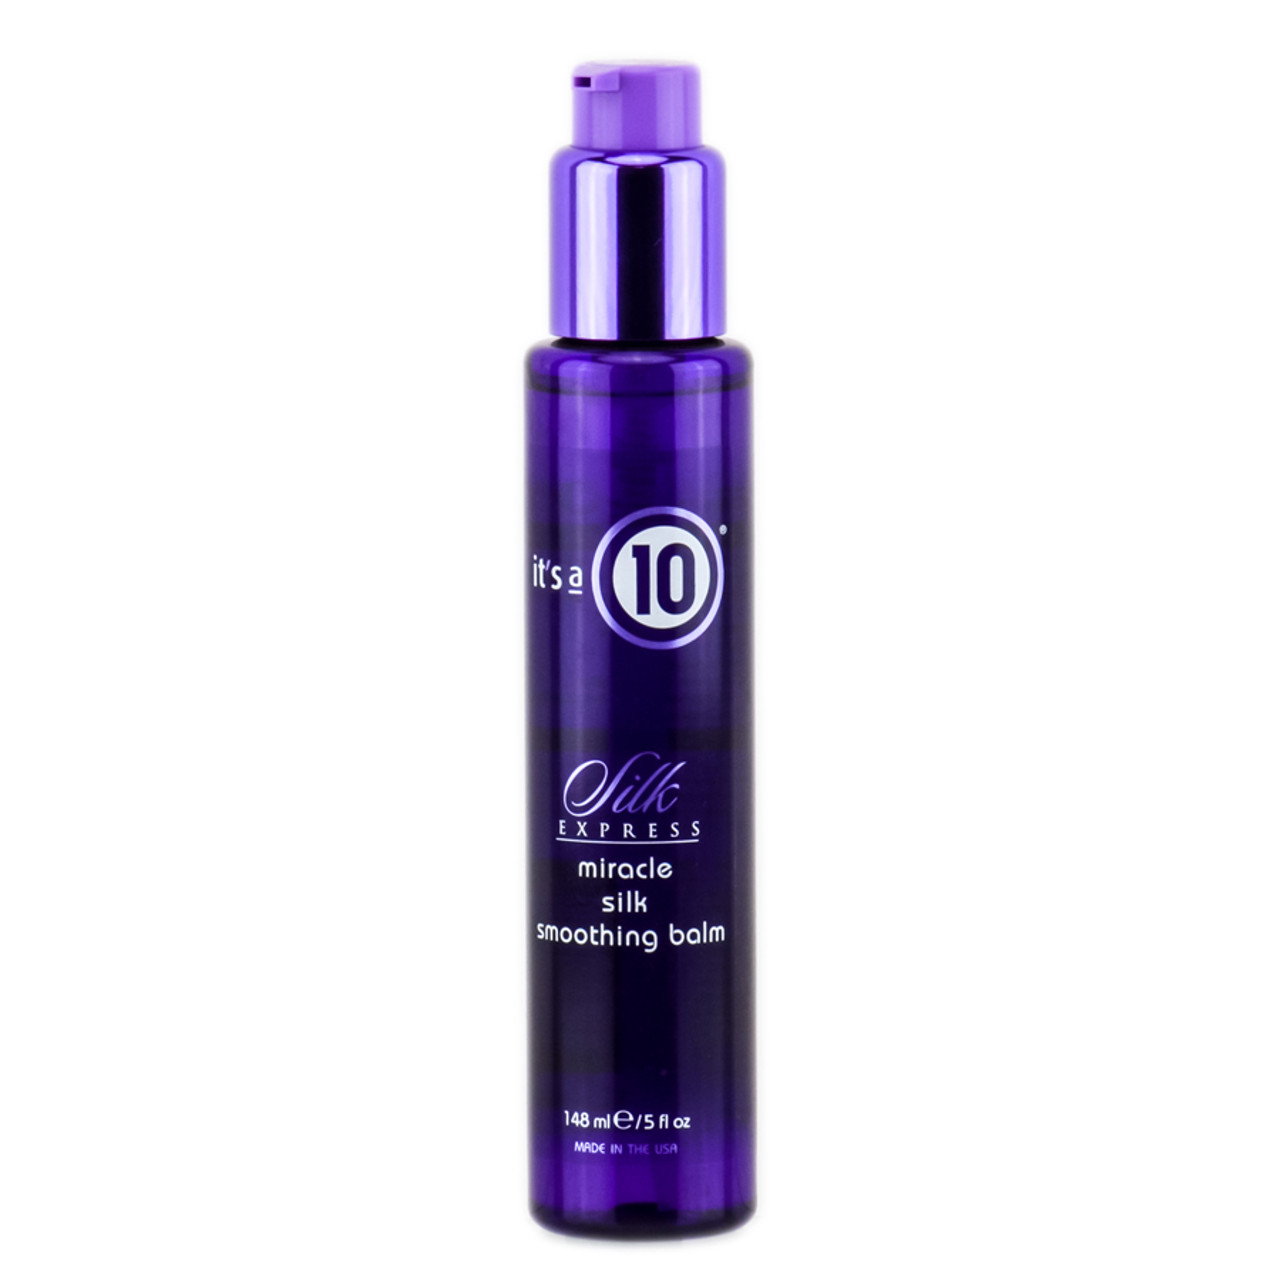 It's A 10 Silk Express Miracle Silk Leave-in Conditioner - 4 oz bottle